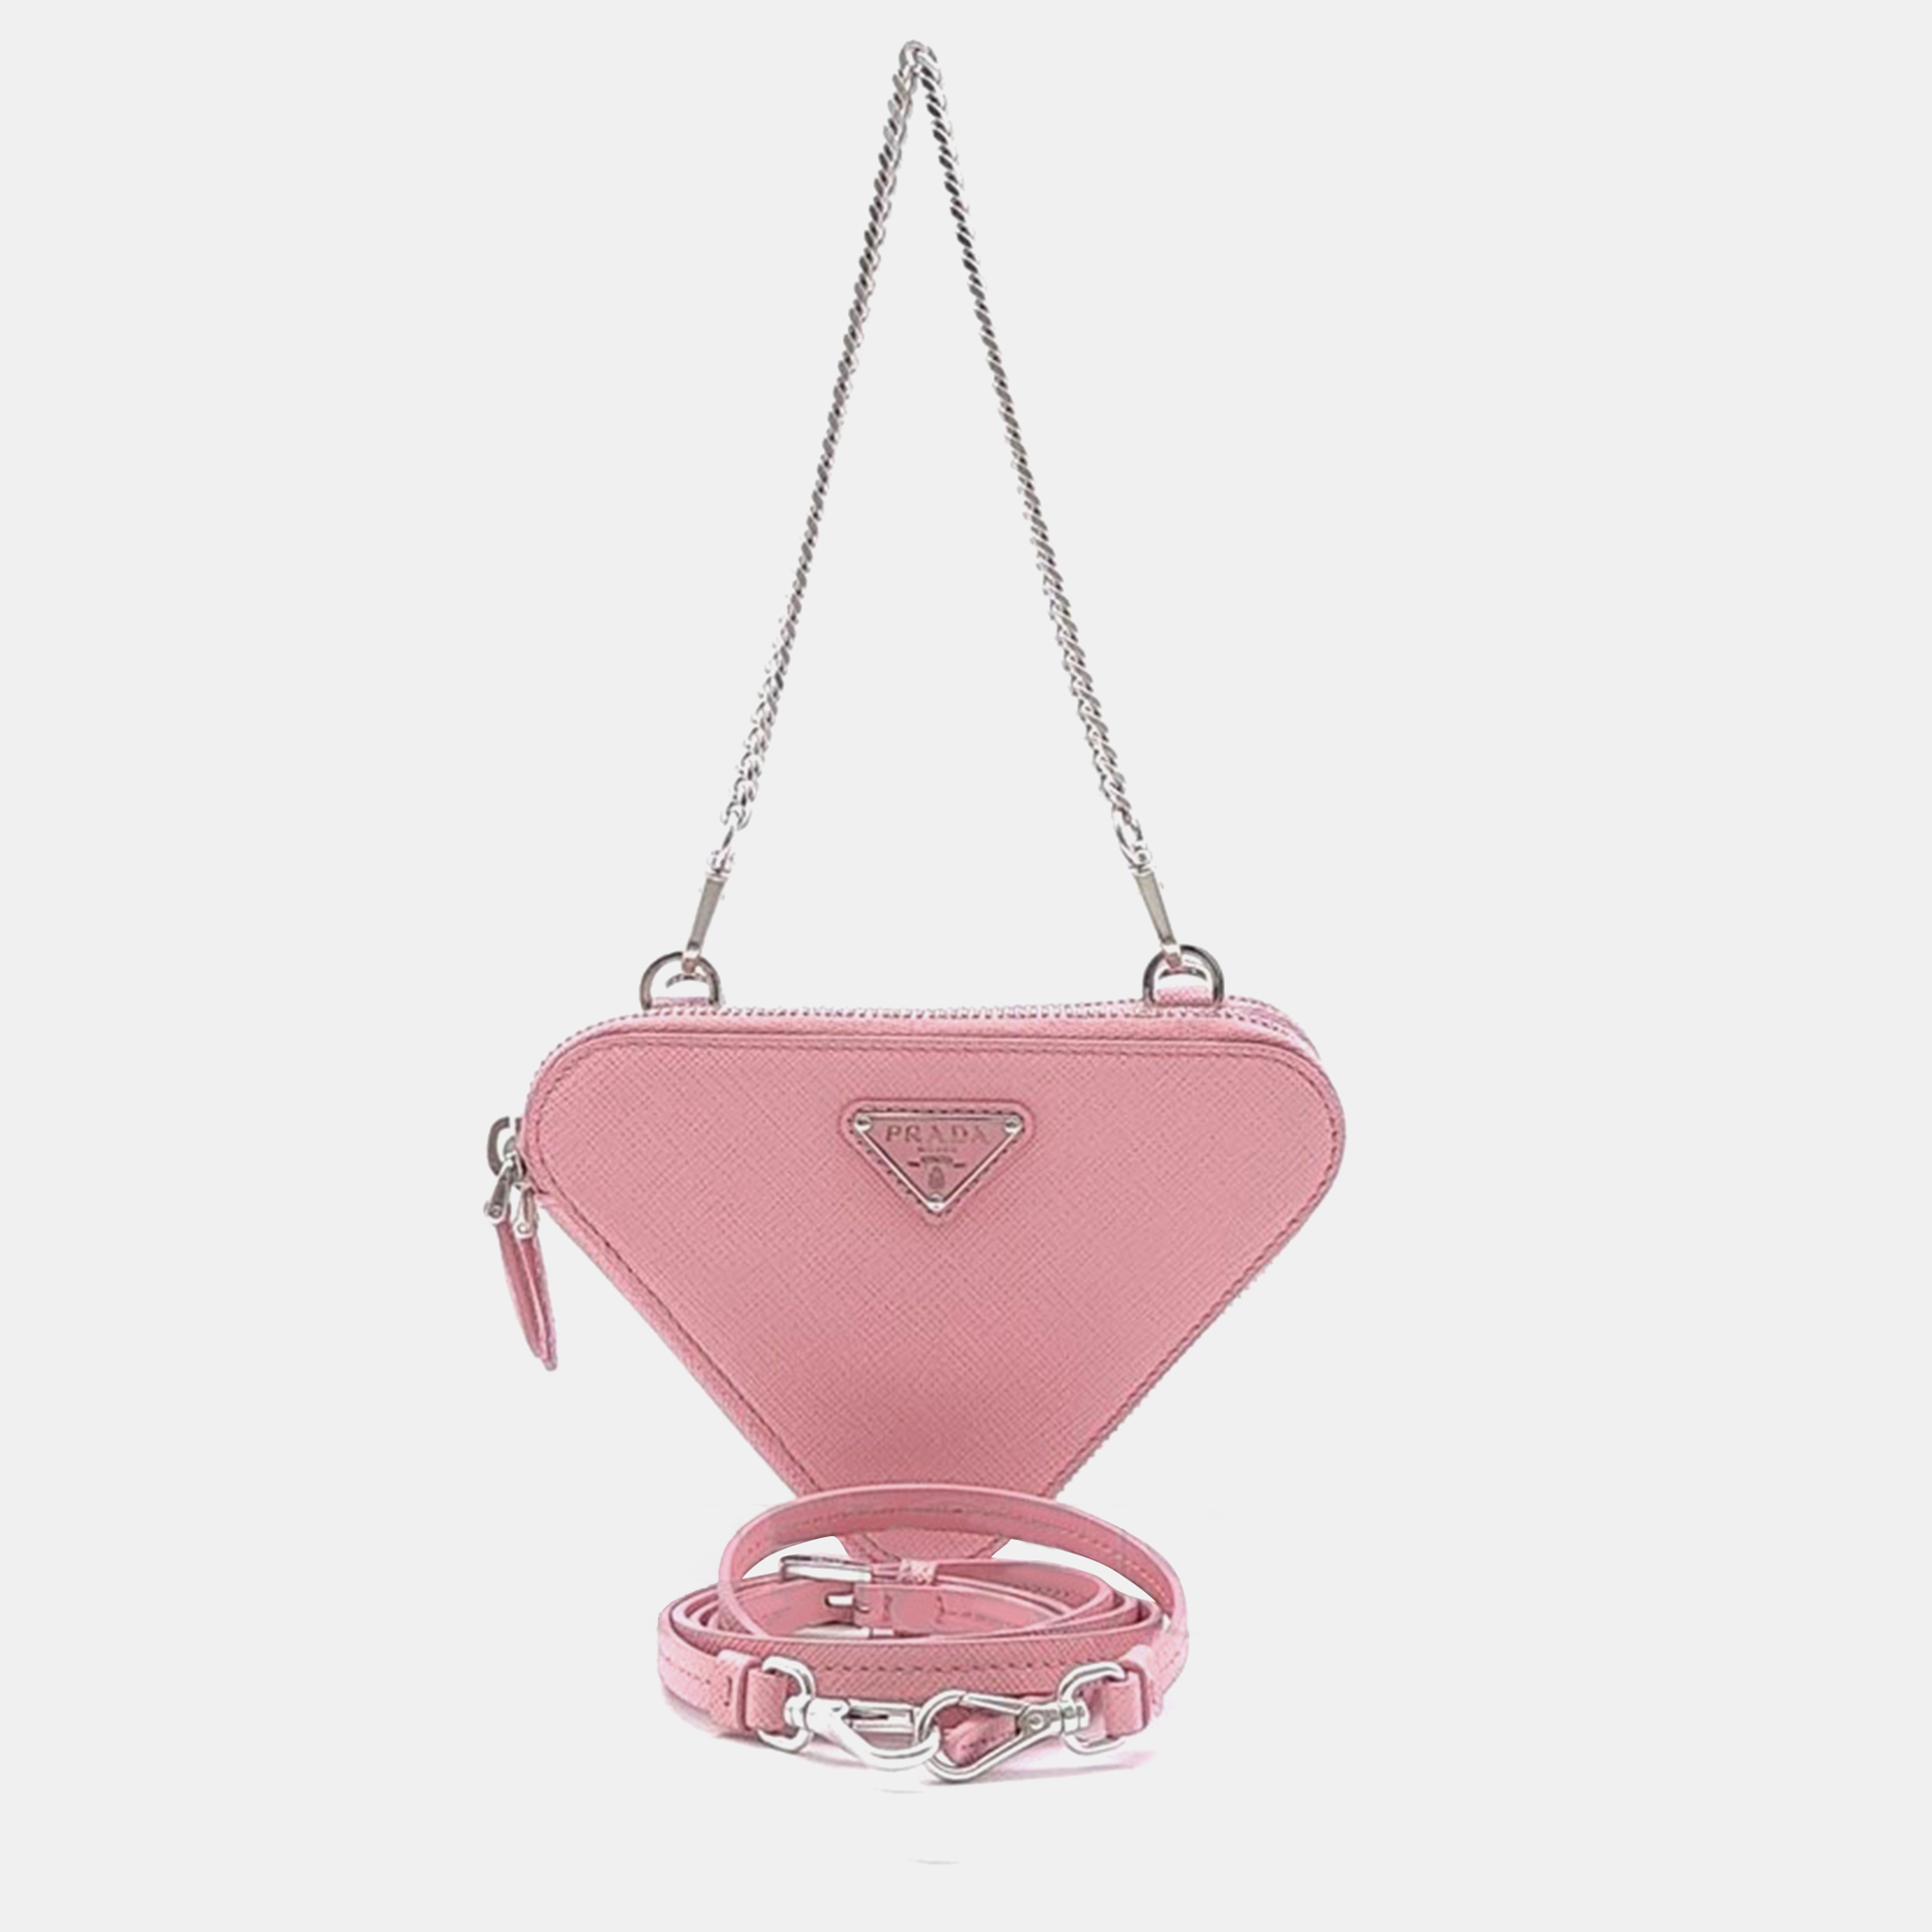 Pre-owned Prada Pink Leather Saffiano Lux Double Triangle Crossbody Bag